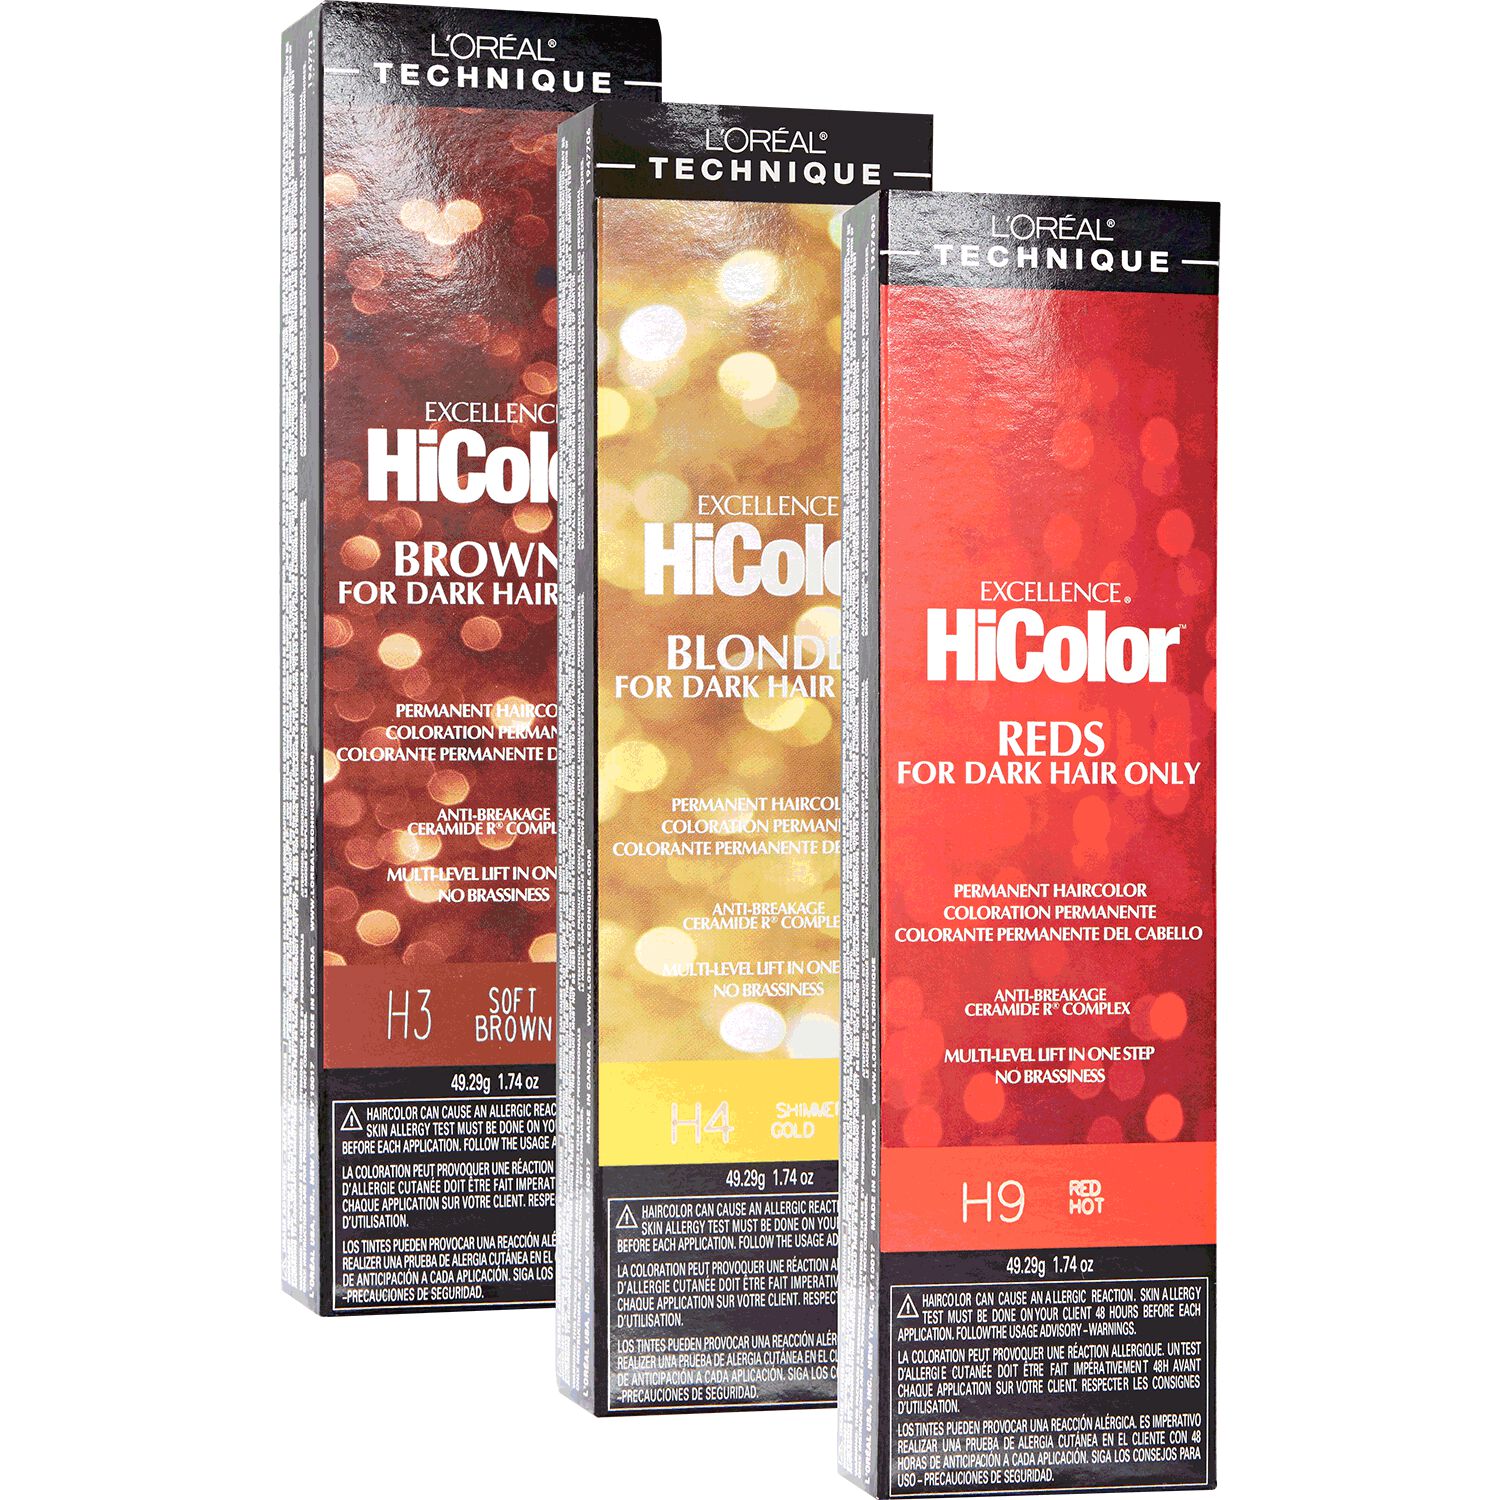 L'Oreal - HiColor Red HiLights Permanent Creme Hair Color